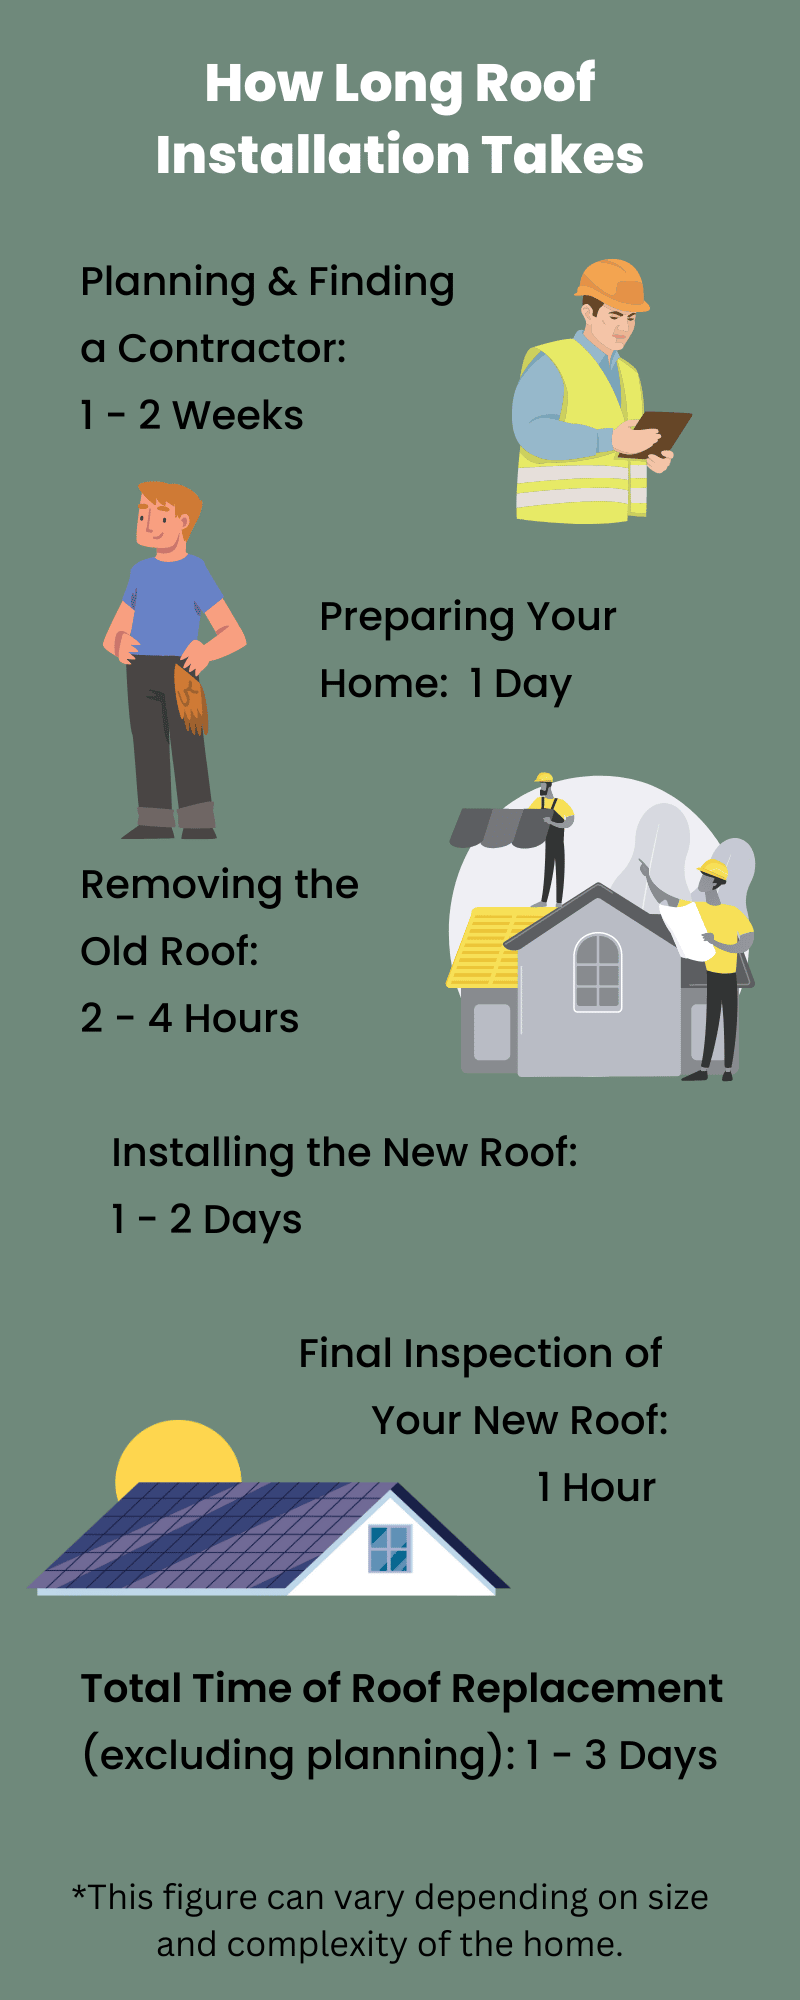 How long does roof installation take?